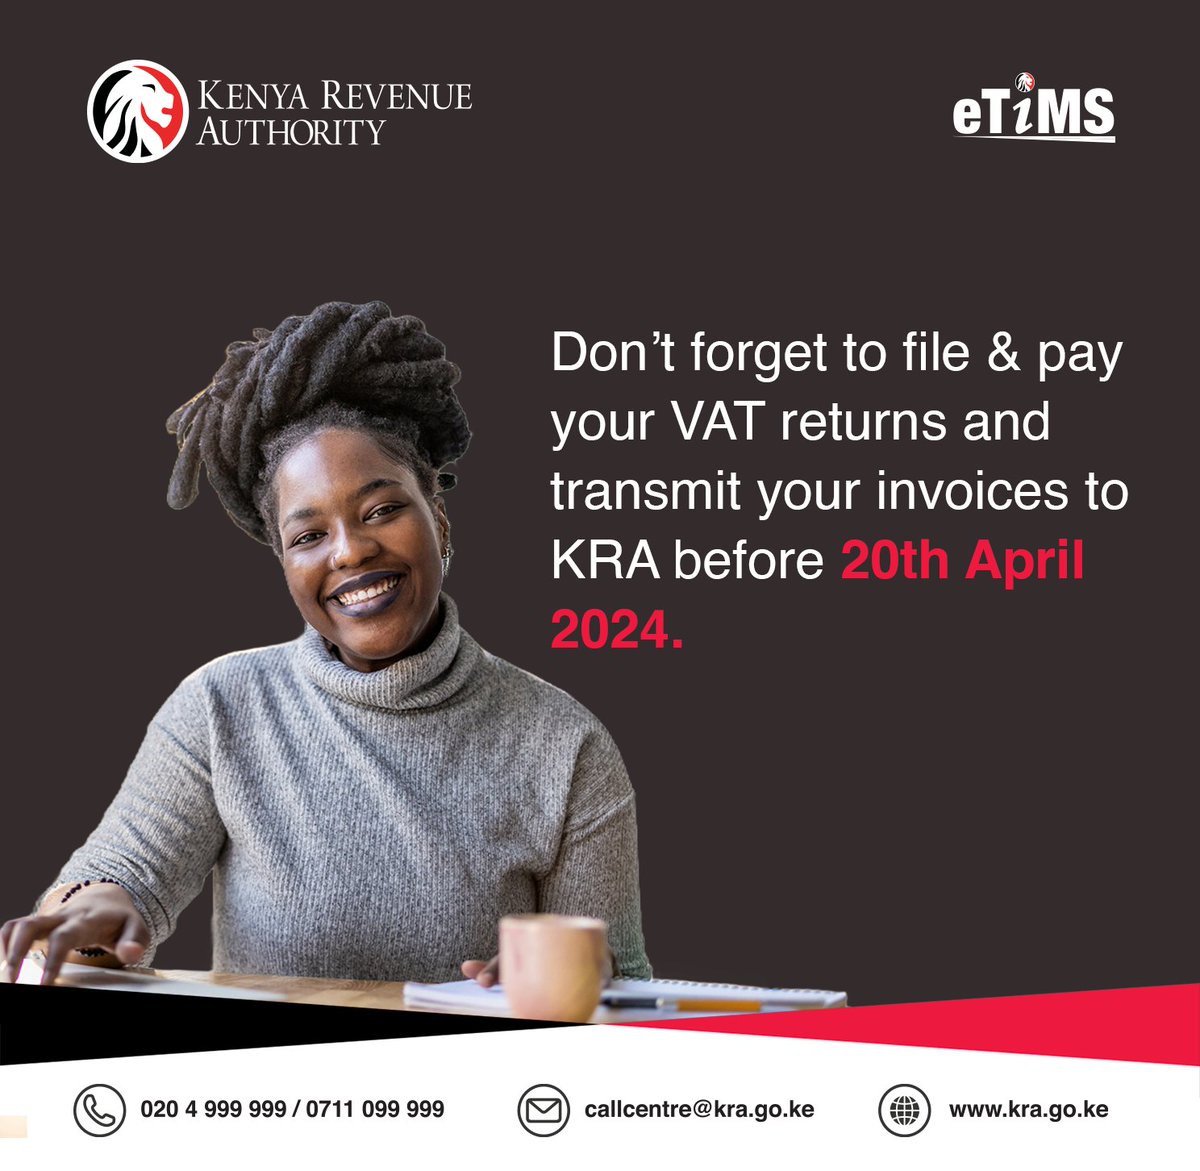 All VAT registered businesses are reminded to file and pay their returns before 20th April 2024. Remember to transmit your invoices to be able to claim business expenses and file returns easily. #ComplianceReminder #KRAeTiMS